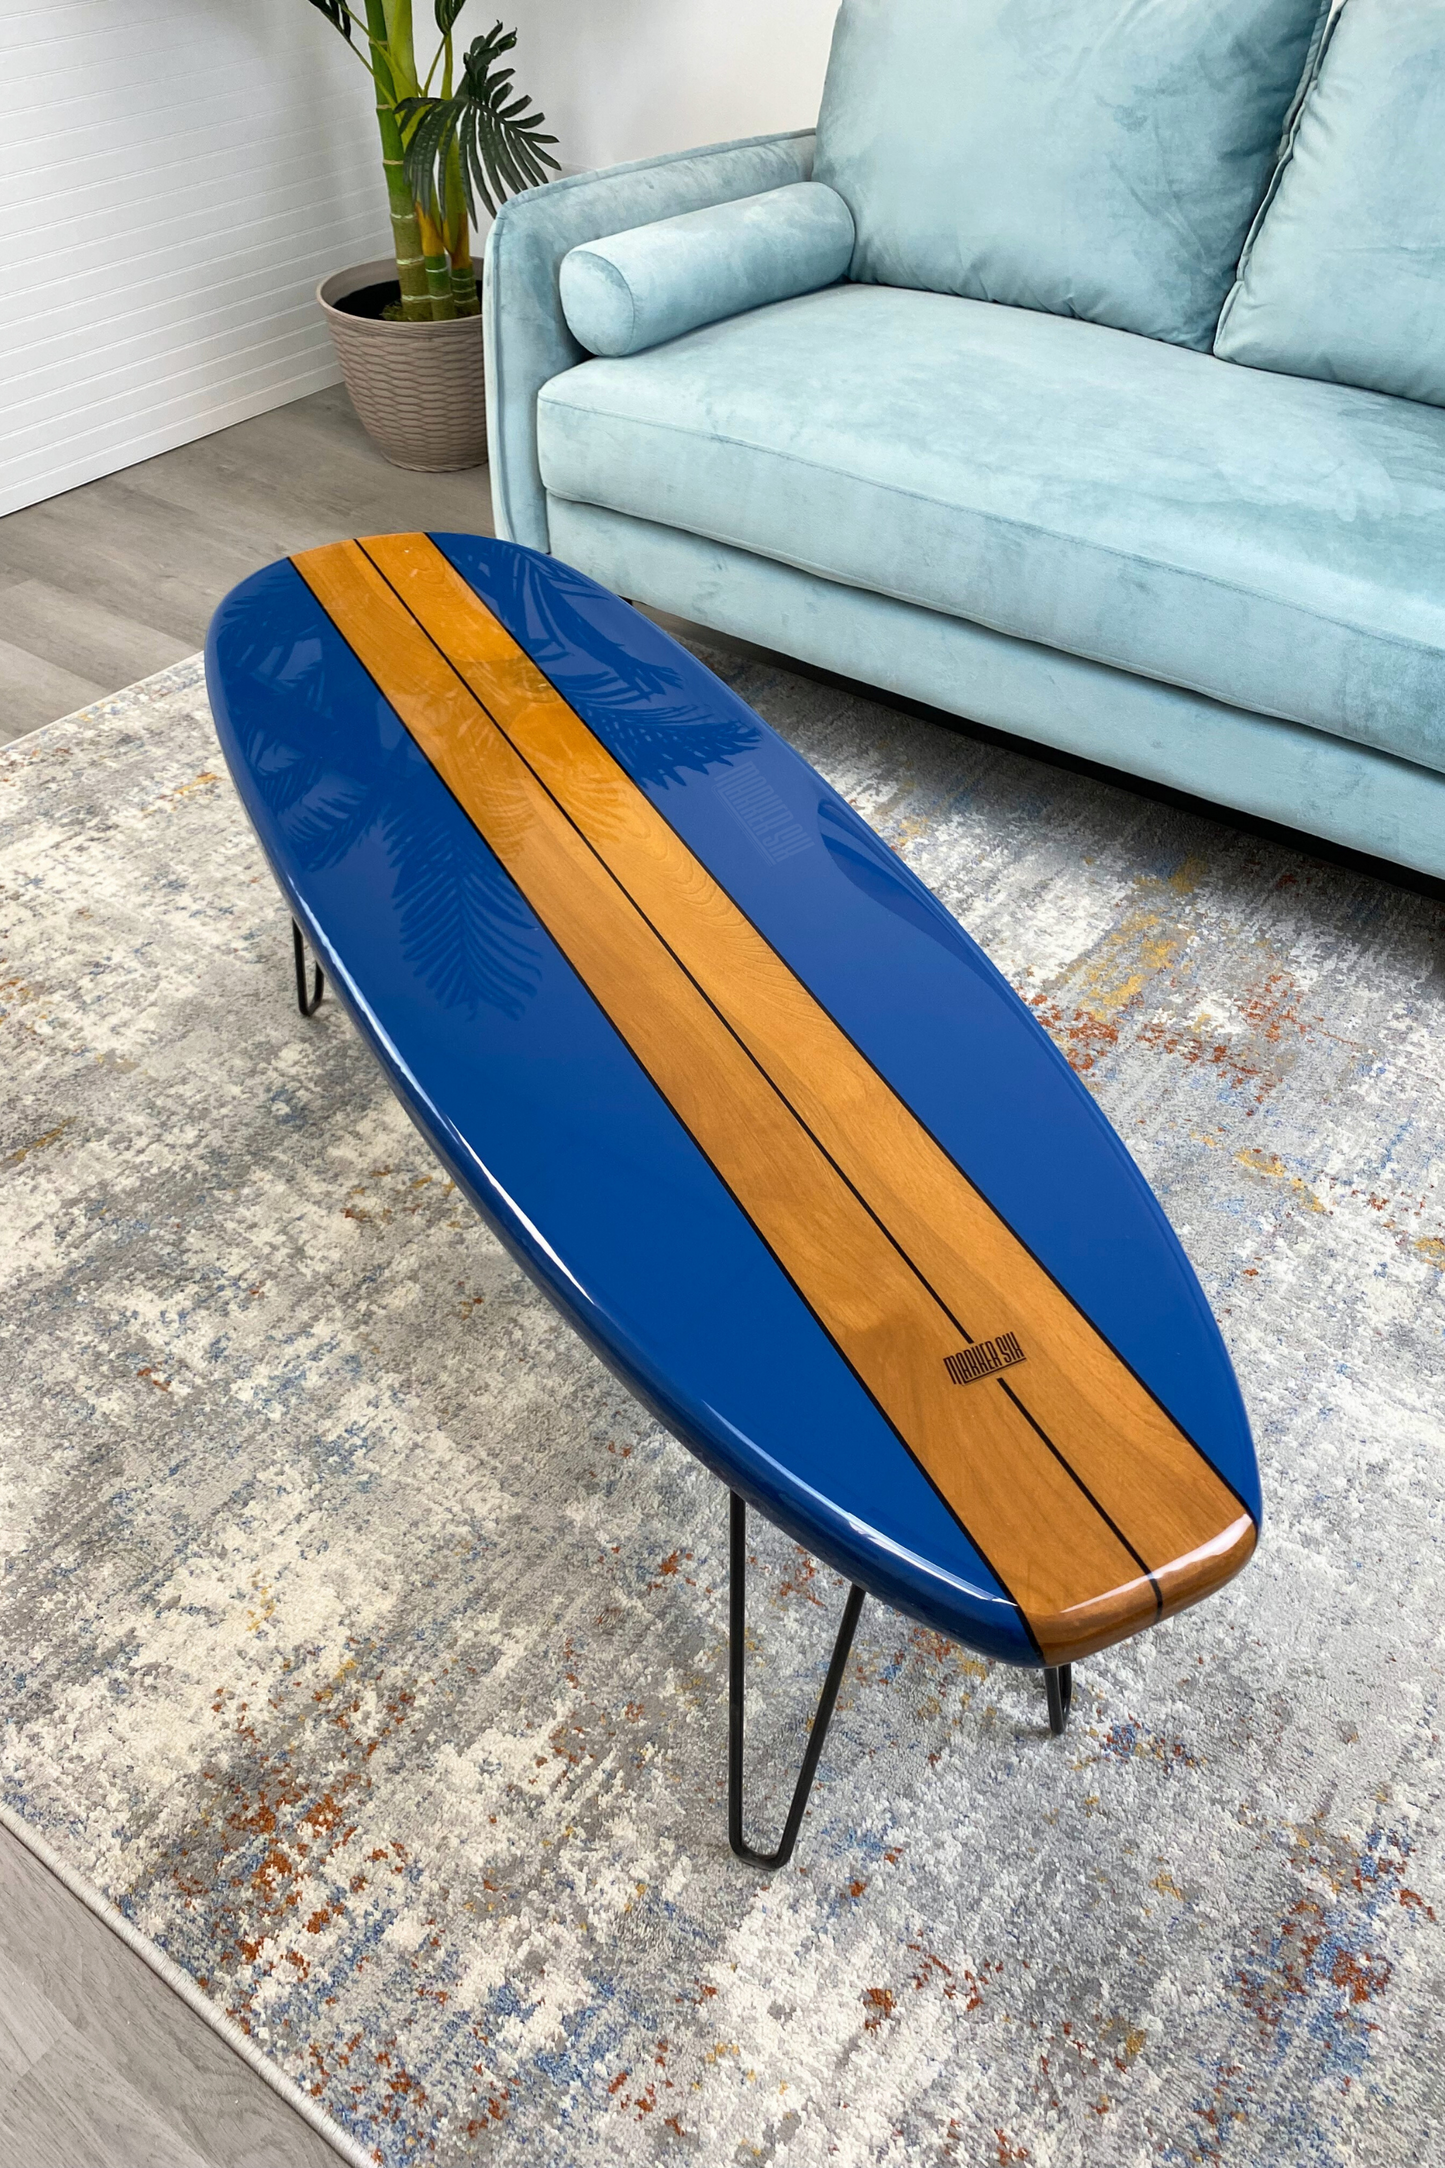 The Rogue Surfboard Coffee Table